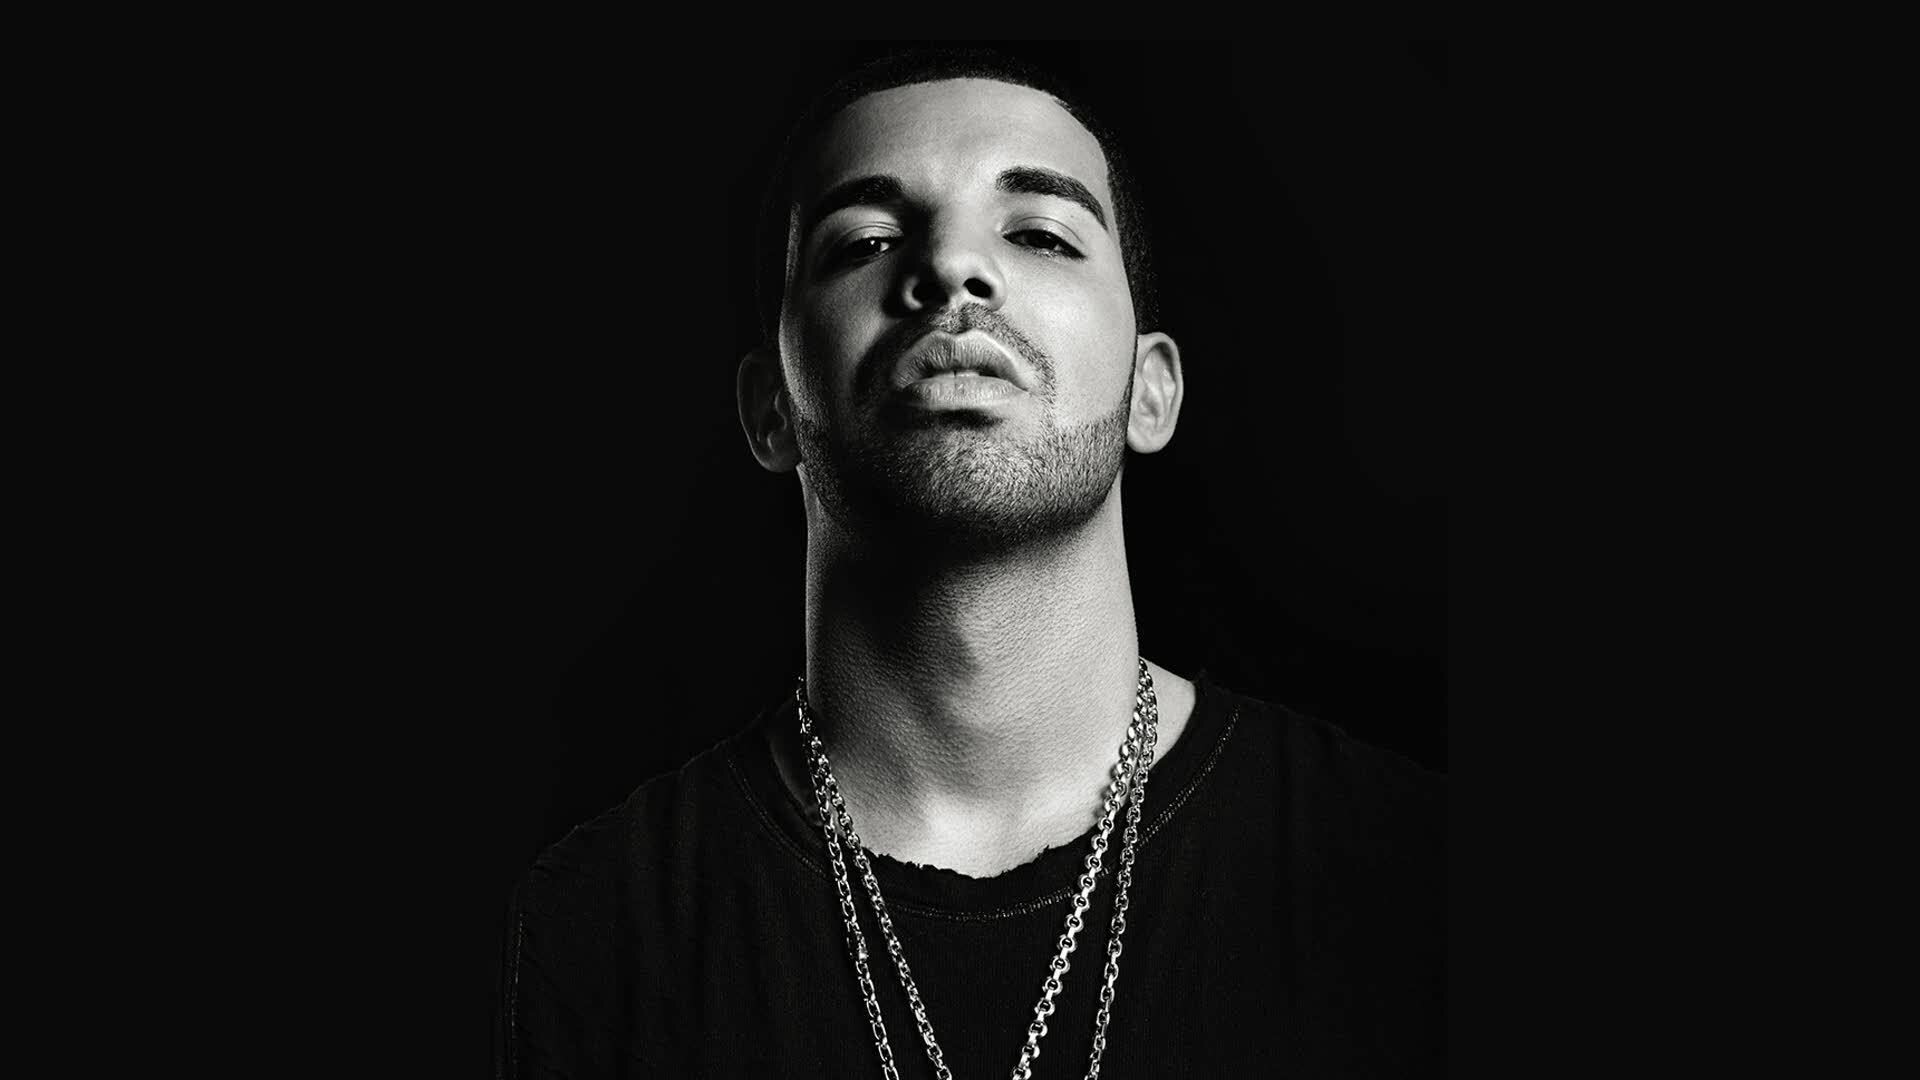 Drake Rapper Wallpaper: HD, 4K, 5K for PC and Mobile. Download free image for iPhone, Android